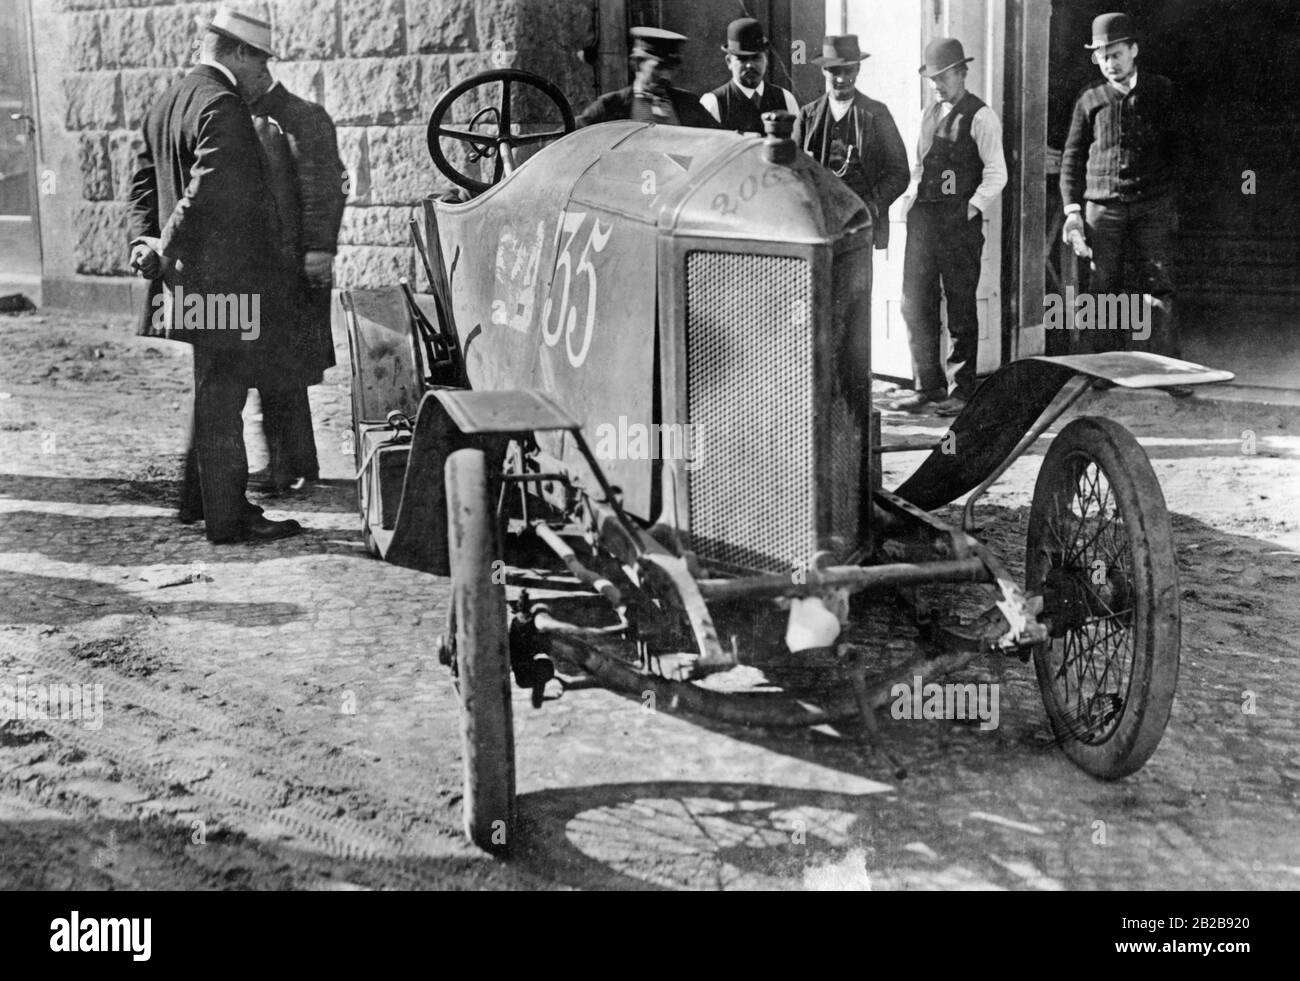 The racing car Laurin & Klement FCR with the number 35 at the International Motor Show, which took place between 12 and 22 October 1911 in the exhibition halls at the Berlin Zoo. The car had won the Gaillon hill climbing race on 1 October 1911. Stock Photo